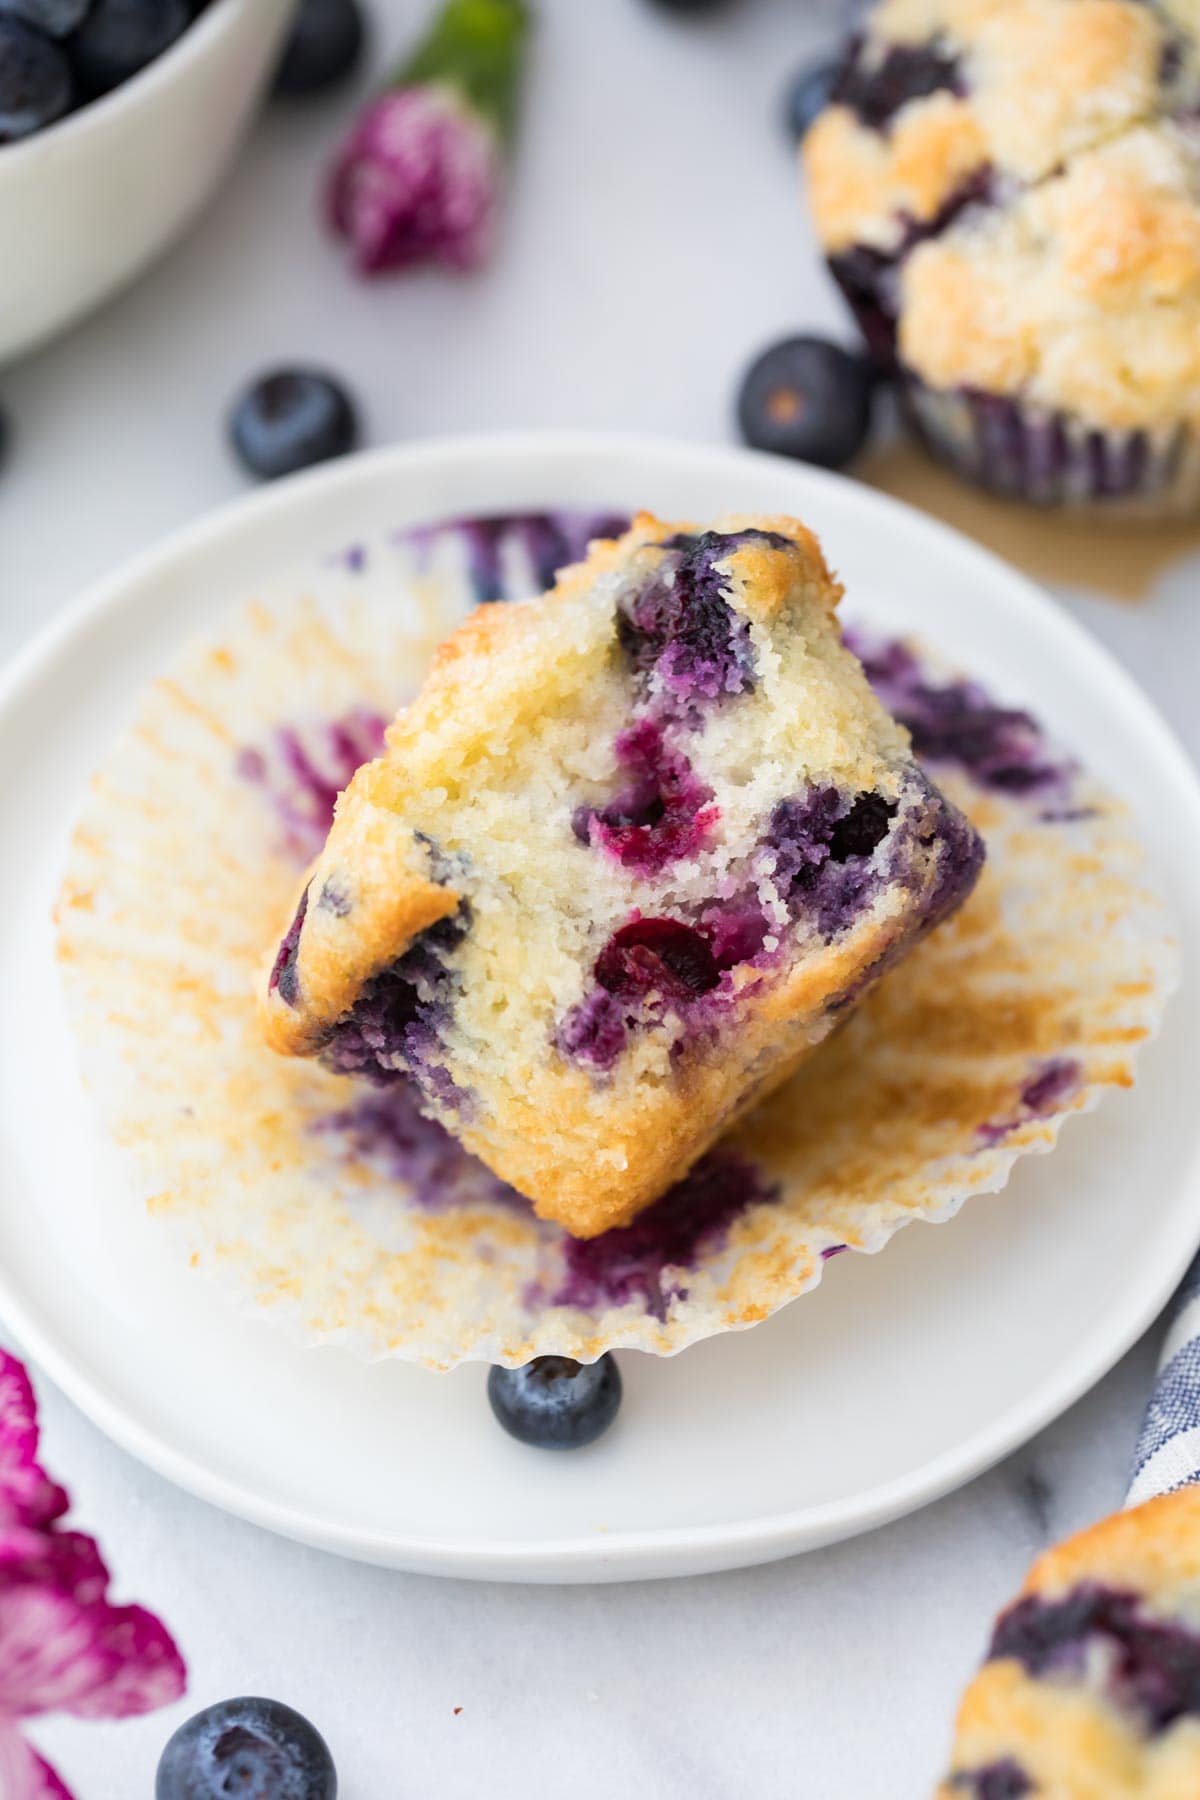 blueberry muffin on wrapper on white plate with a bite taken out of it to show fluffy interior